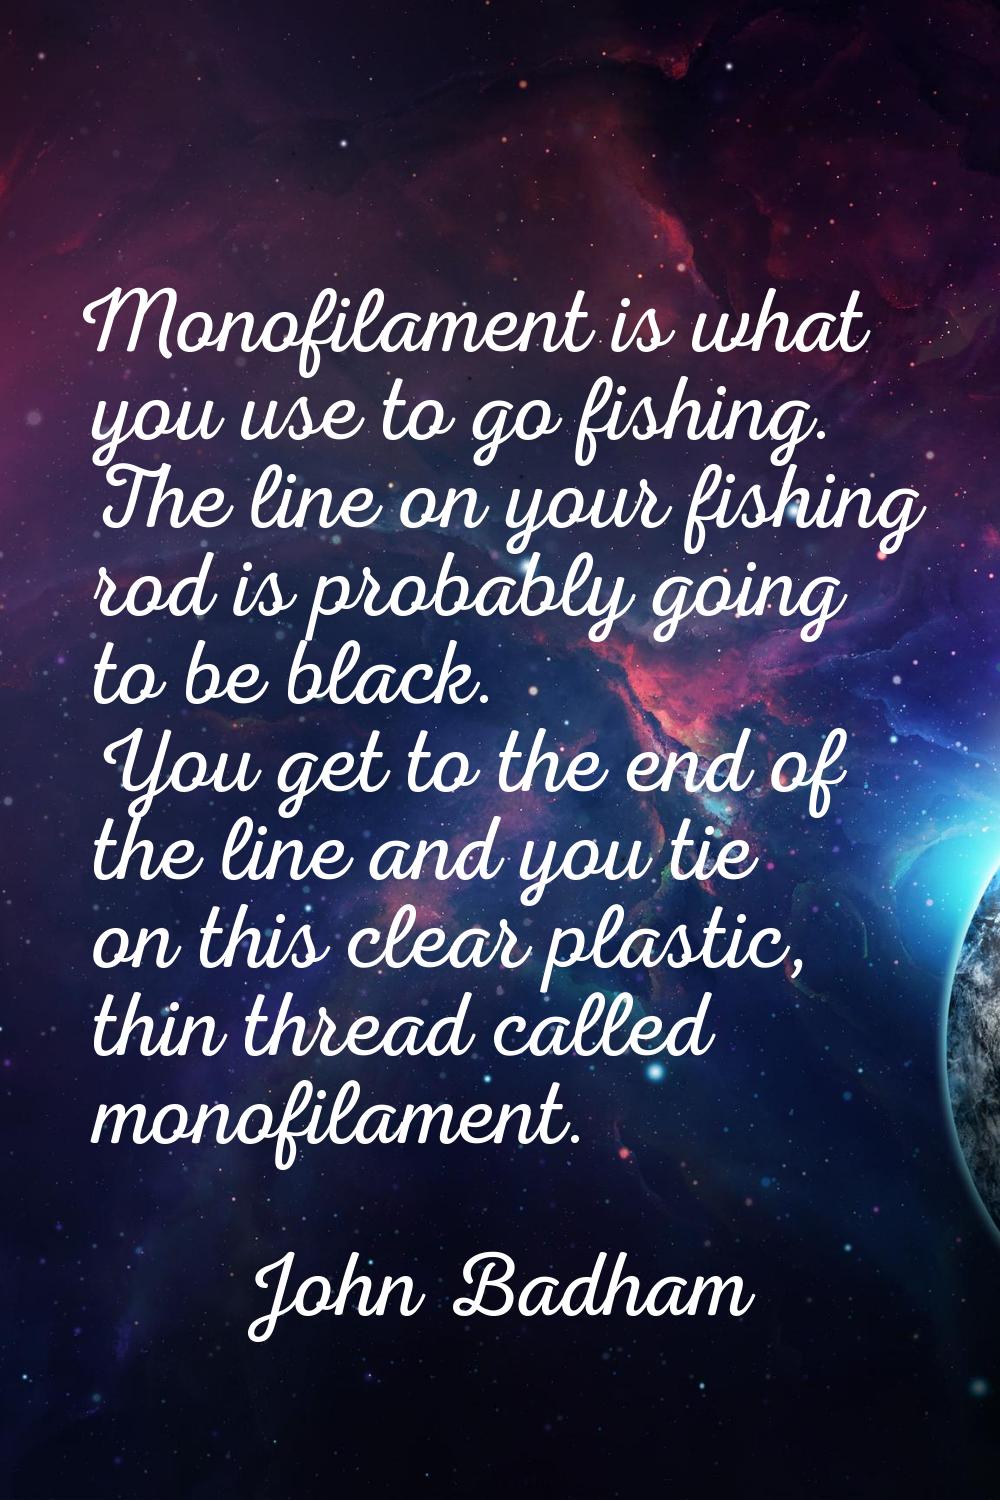 Monofilament is what you use to go fishing. The line on your fishing rod is probably going to be bl